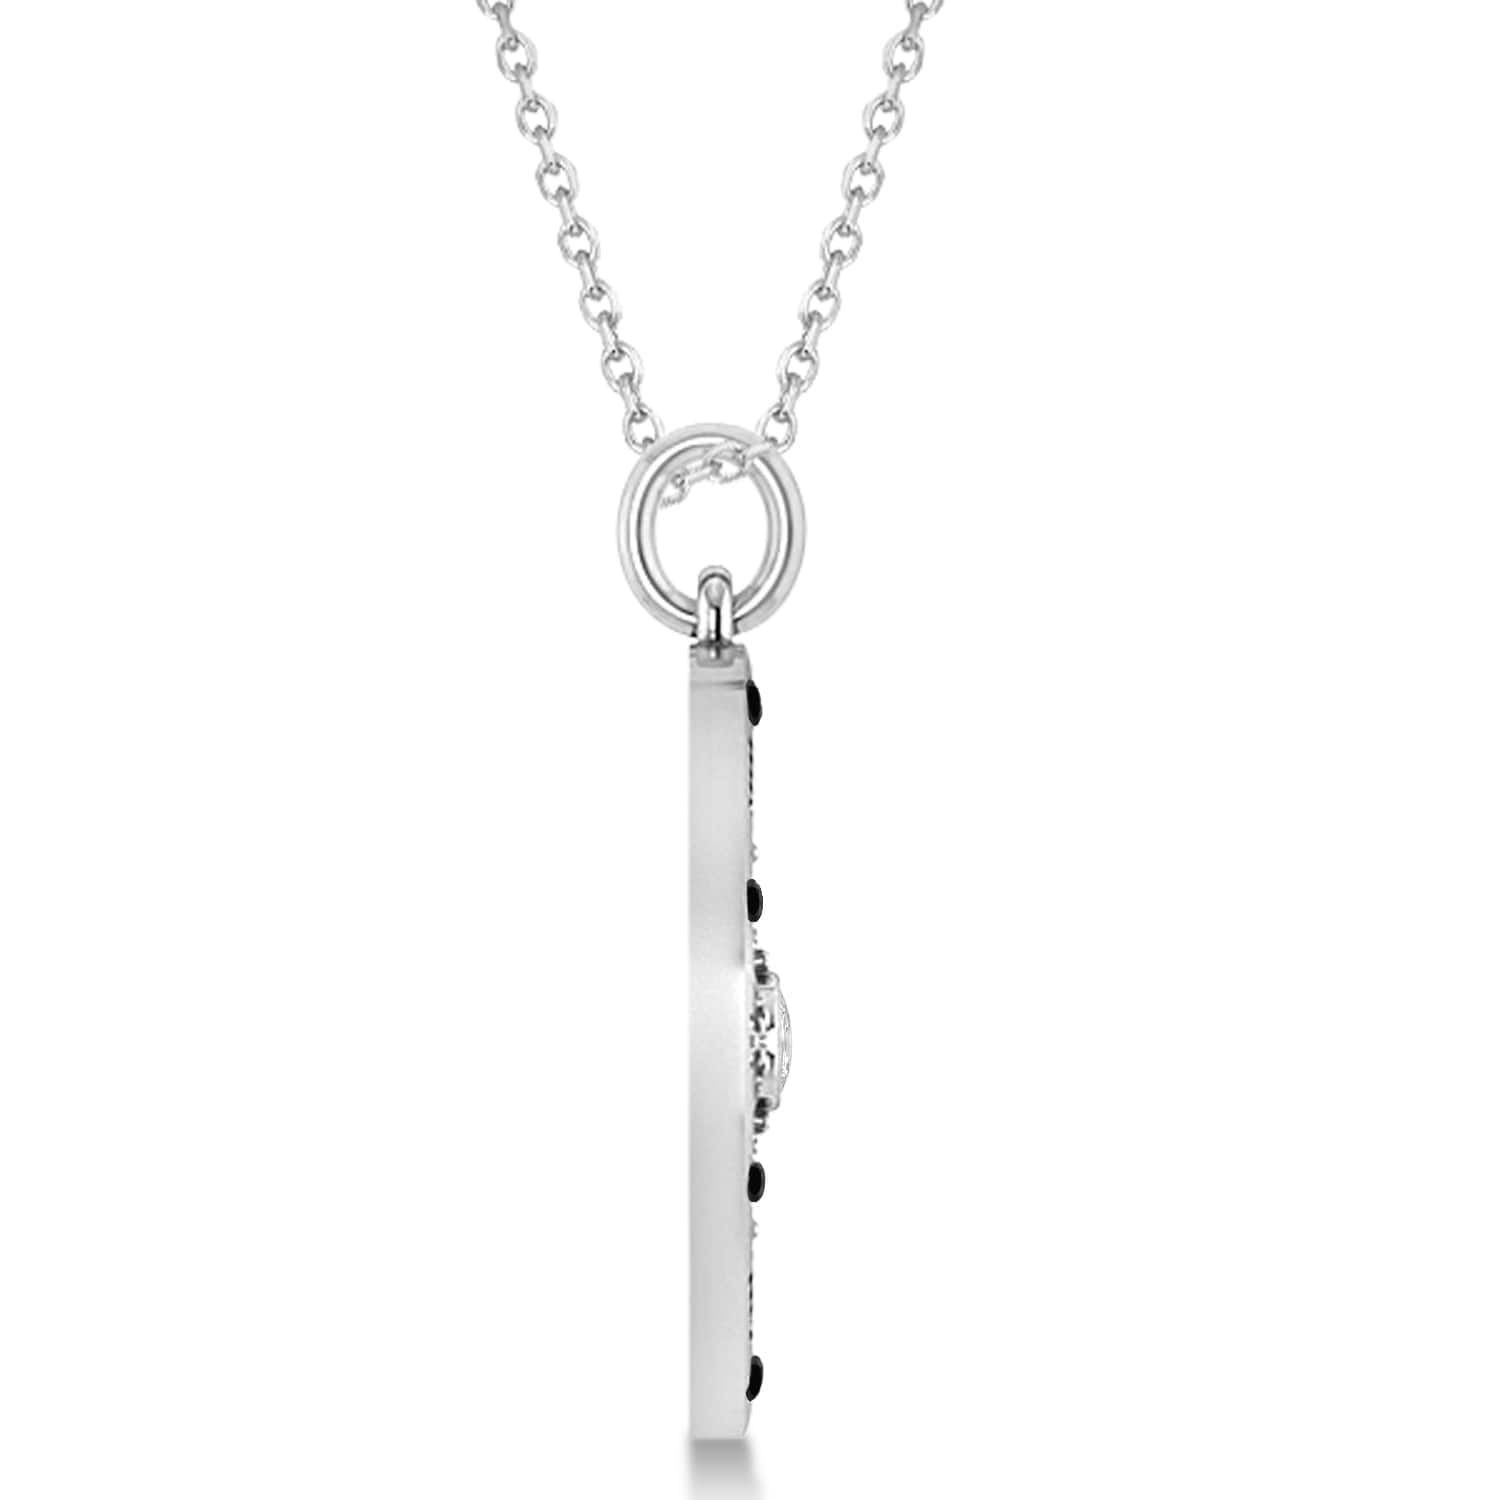 Extra Large Compass Pendant For Men Black & White Diamond Accented 14k White Gold (0.45ct)